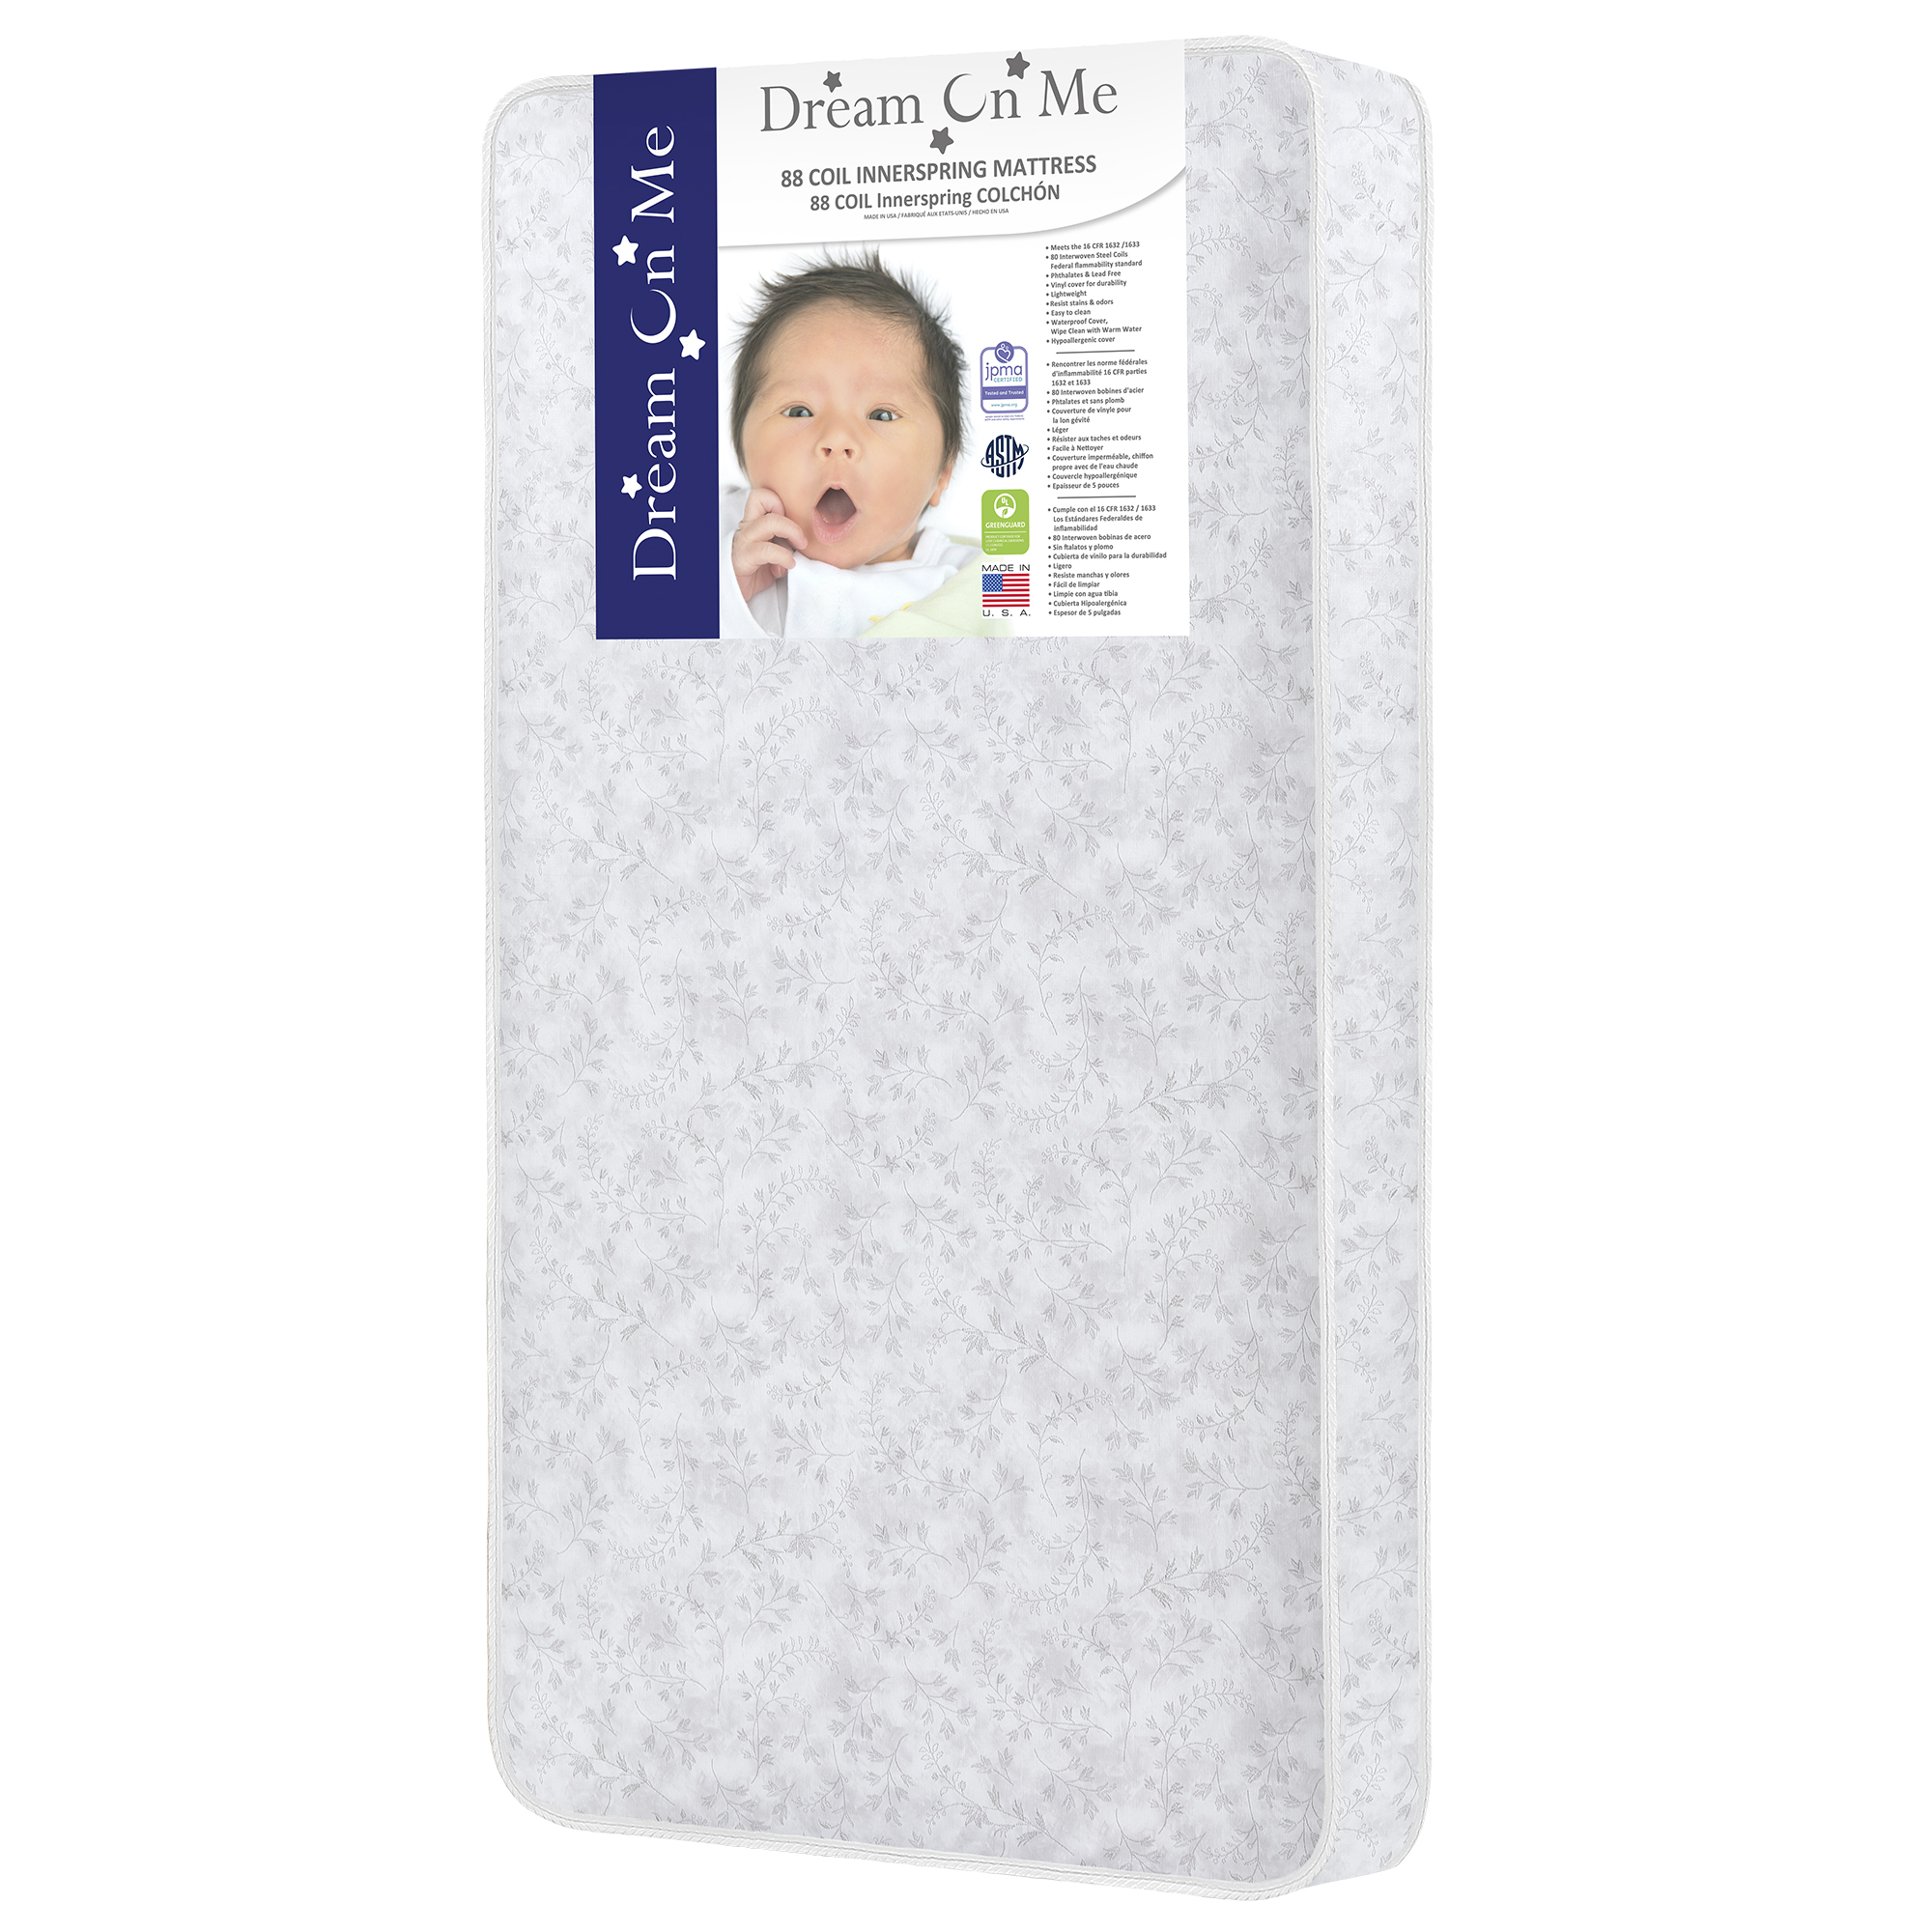 Dream on Me Twinkle 5" 88 Coil Crib & Toddler Mattress, Morning Mist Floral, Greenguard Gold Certified - image 8 of 16